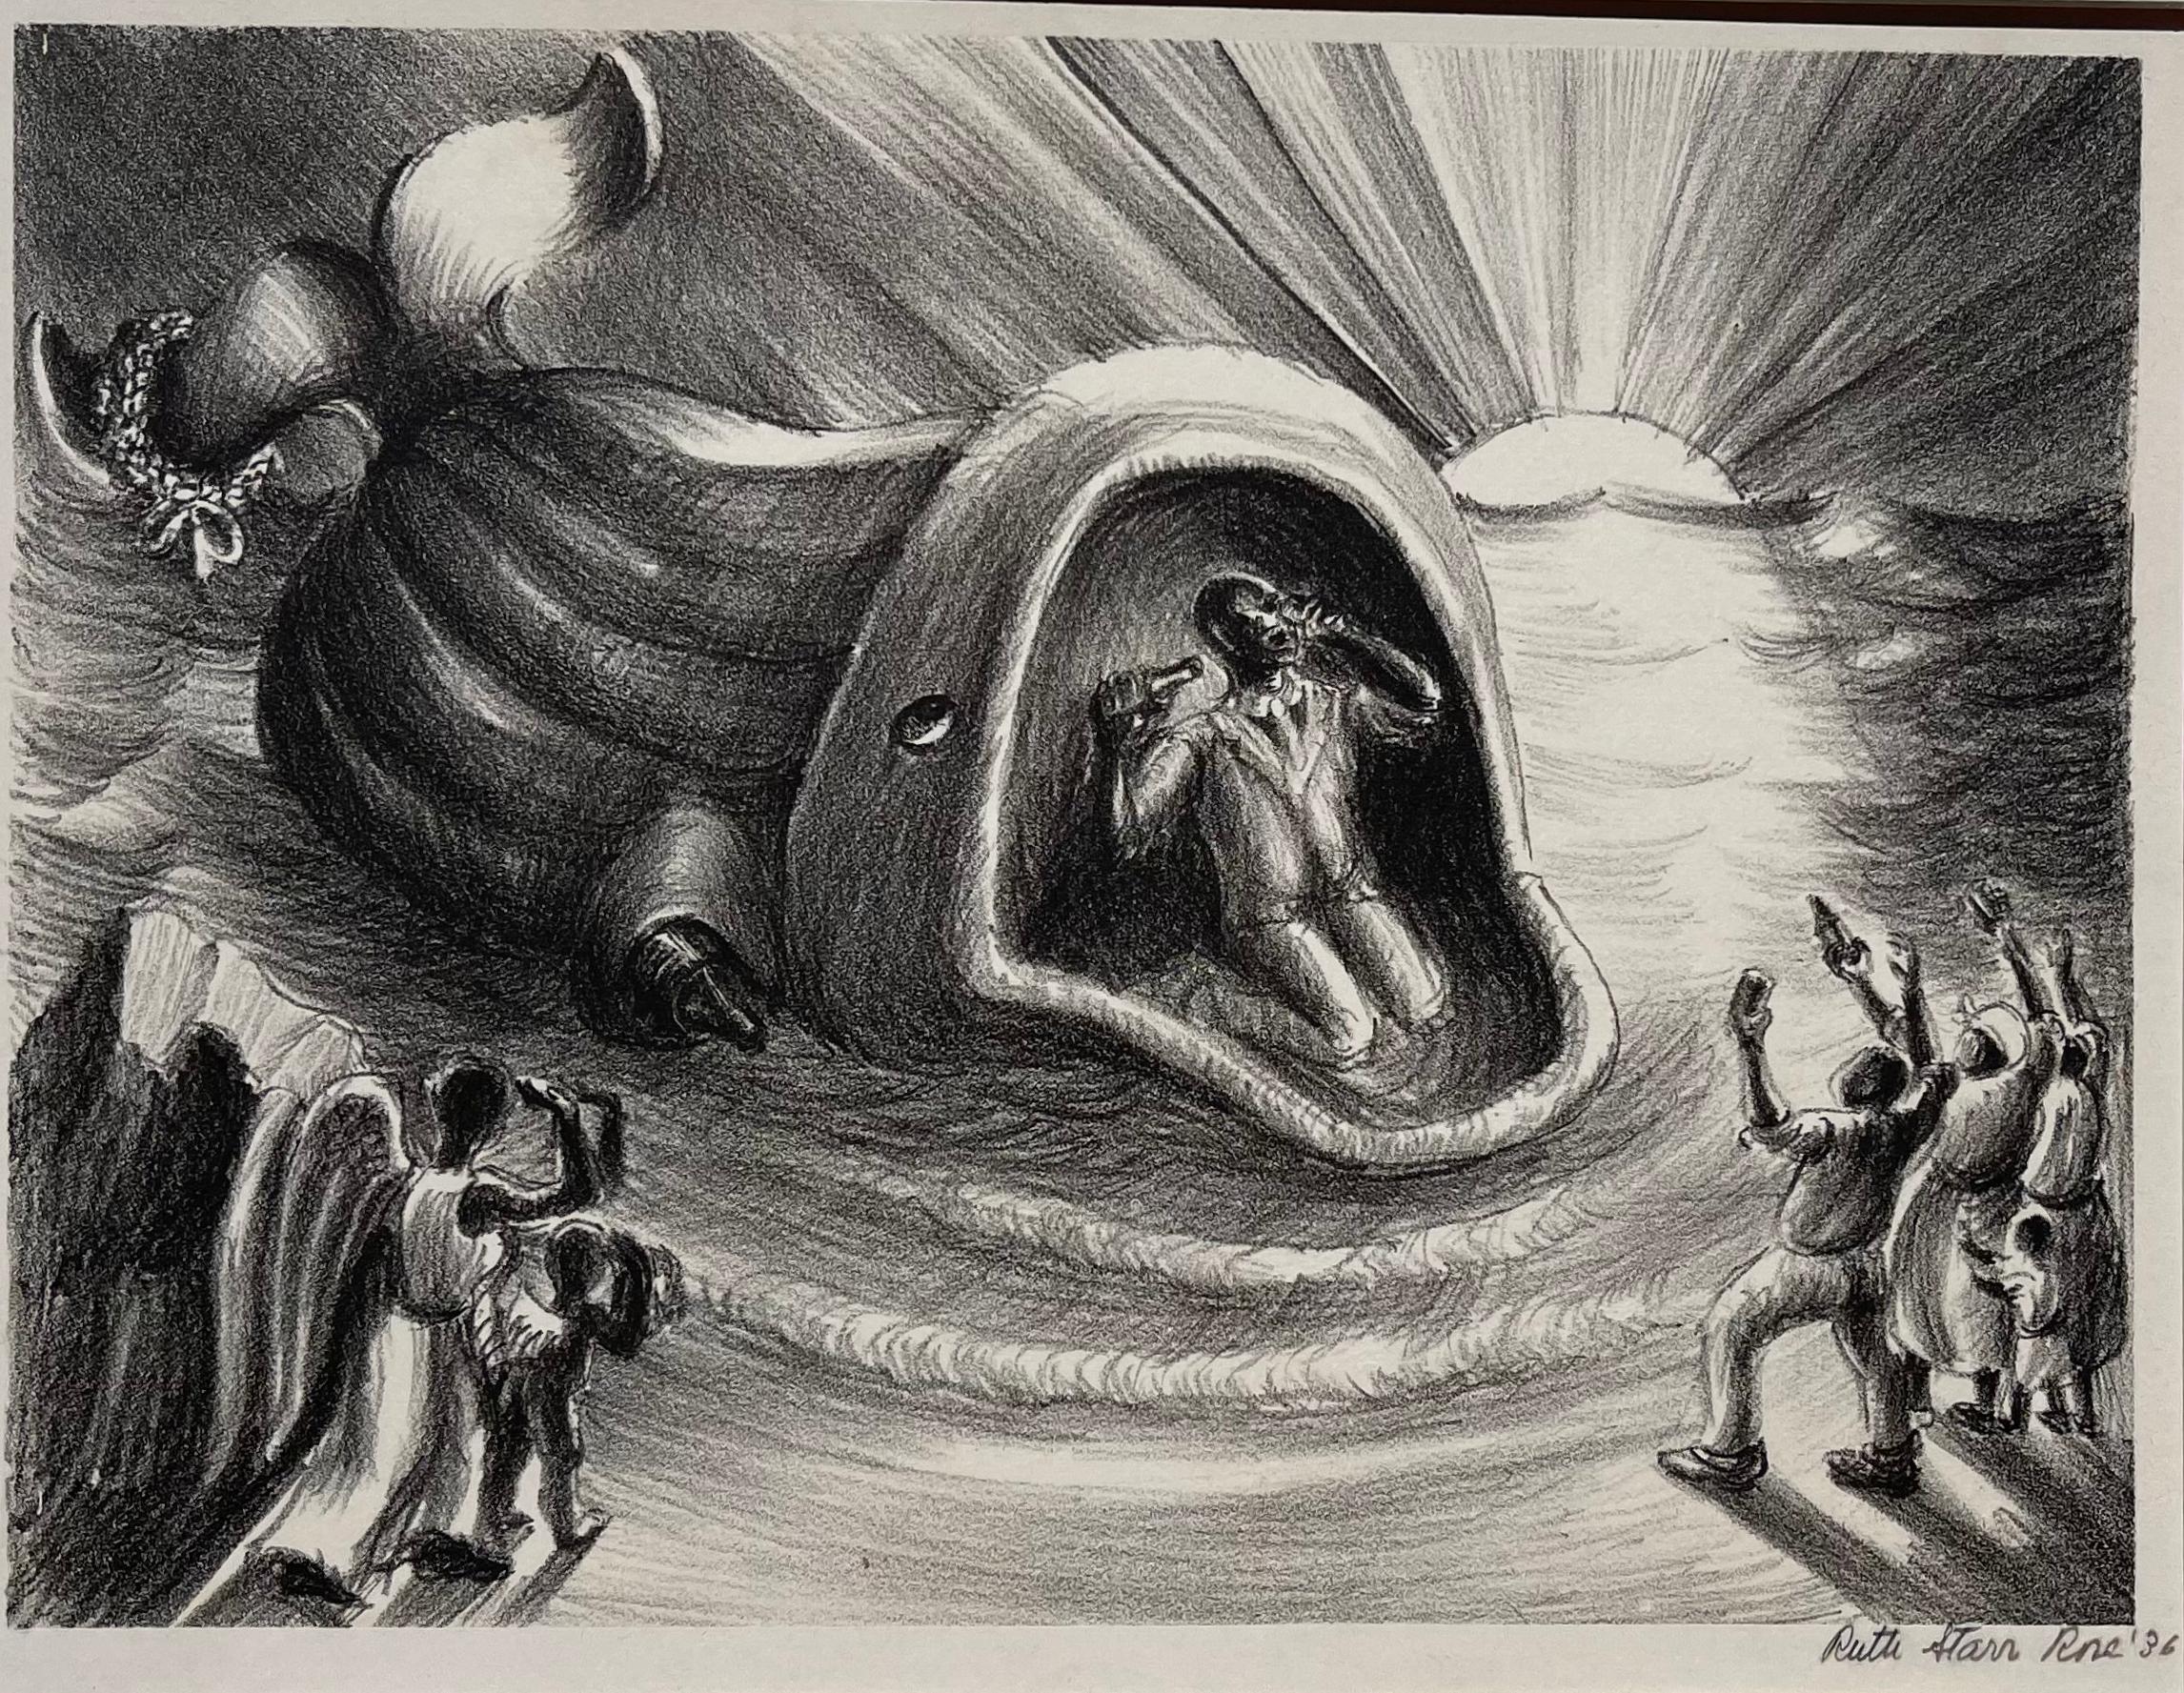 Ruth Starr Rose Figurative Print - JONAH AND THE WHALE